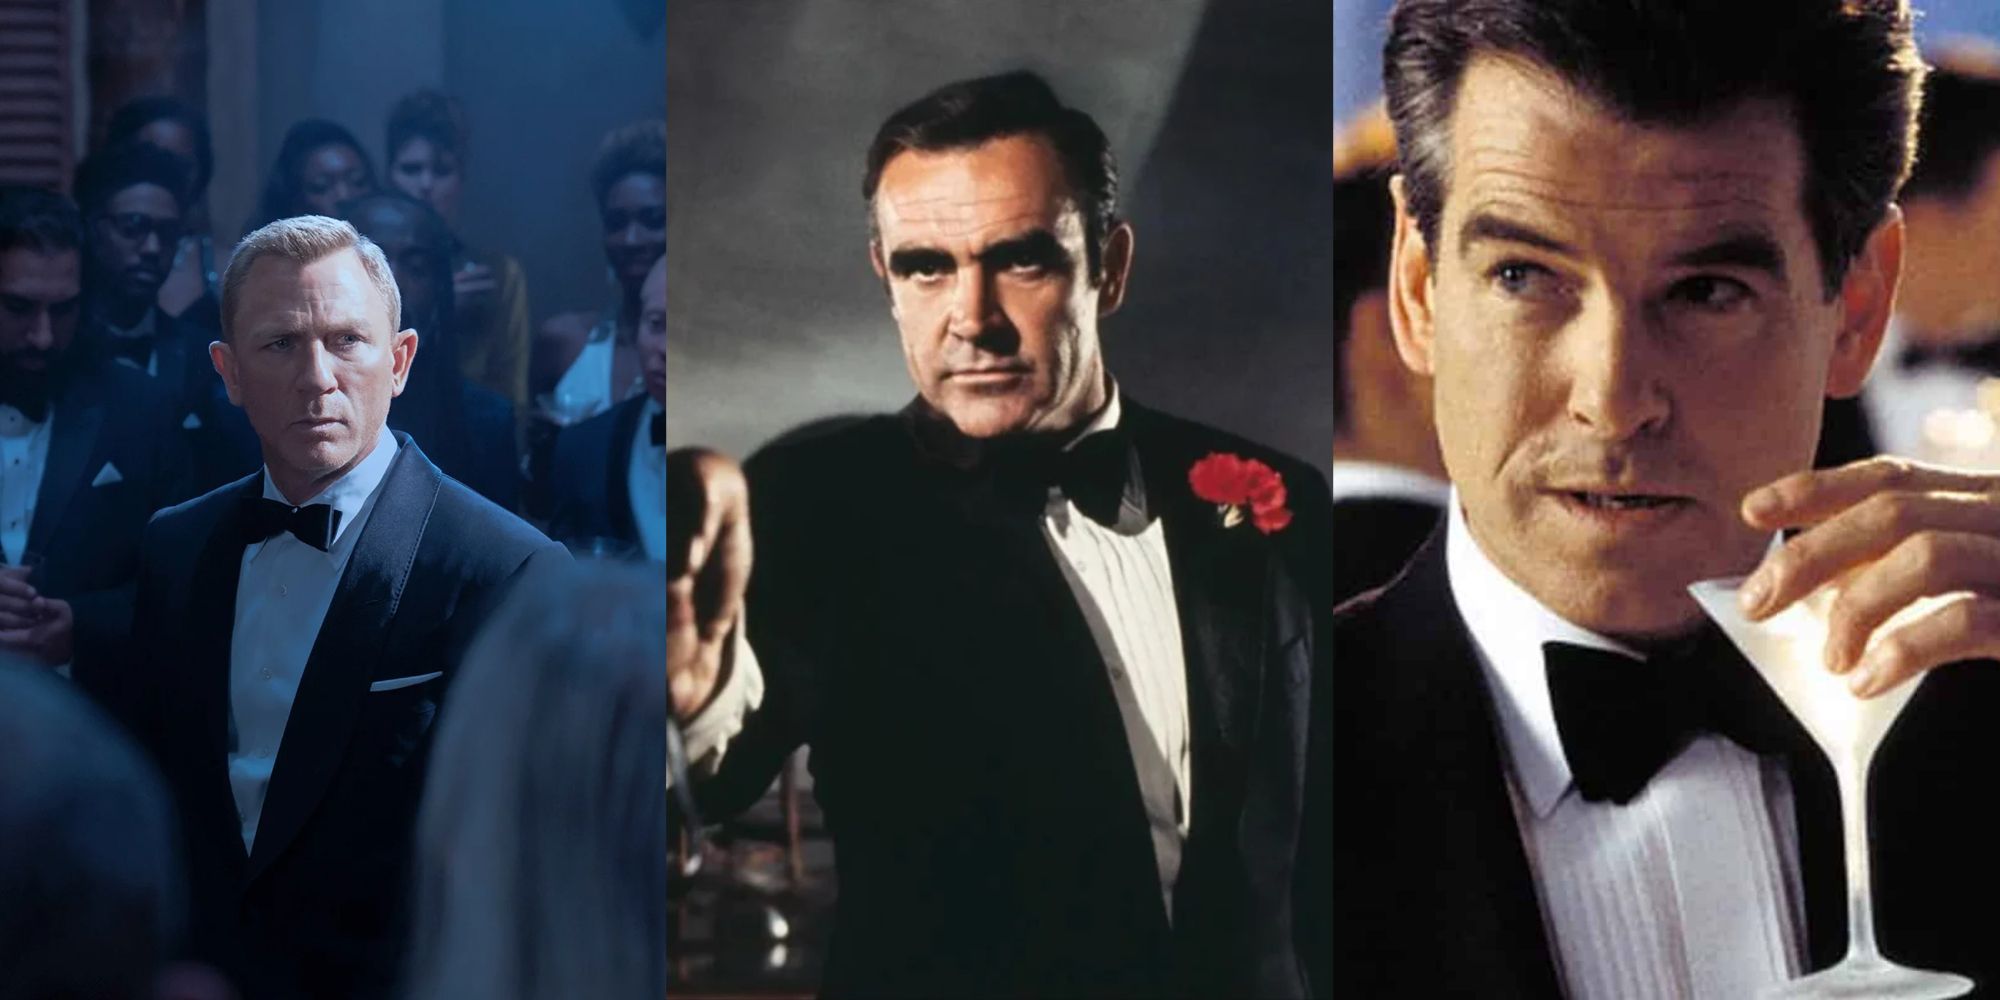 007: 15 Facts About James Bond That Fans & Newcomers Need To Know